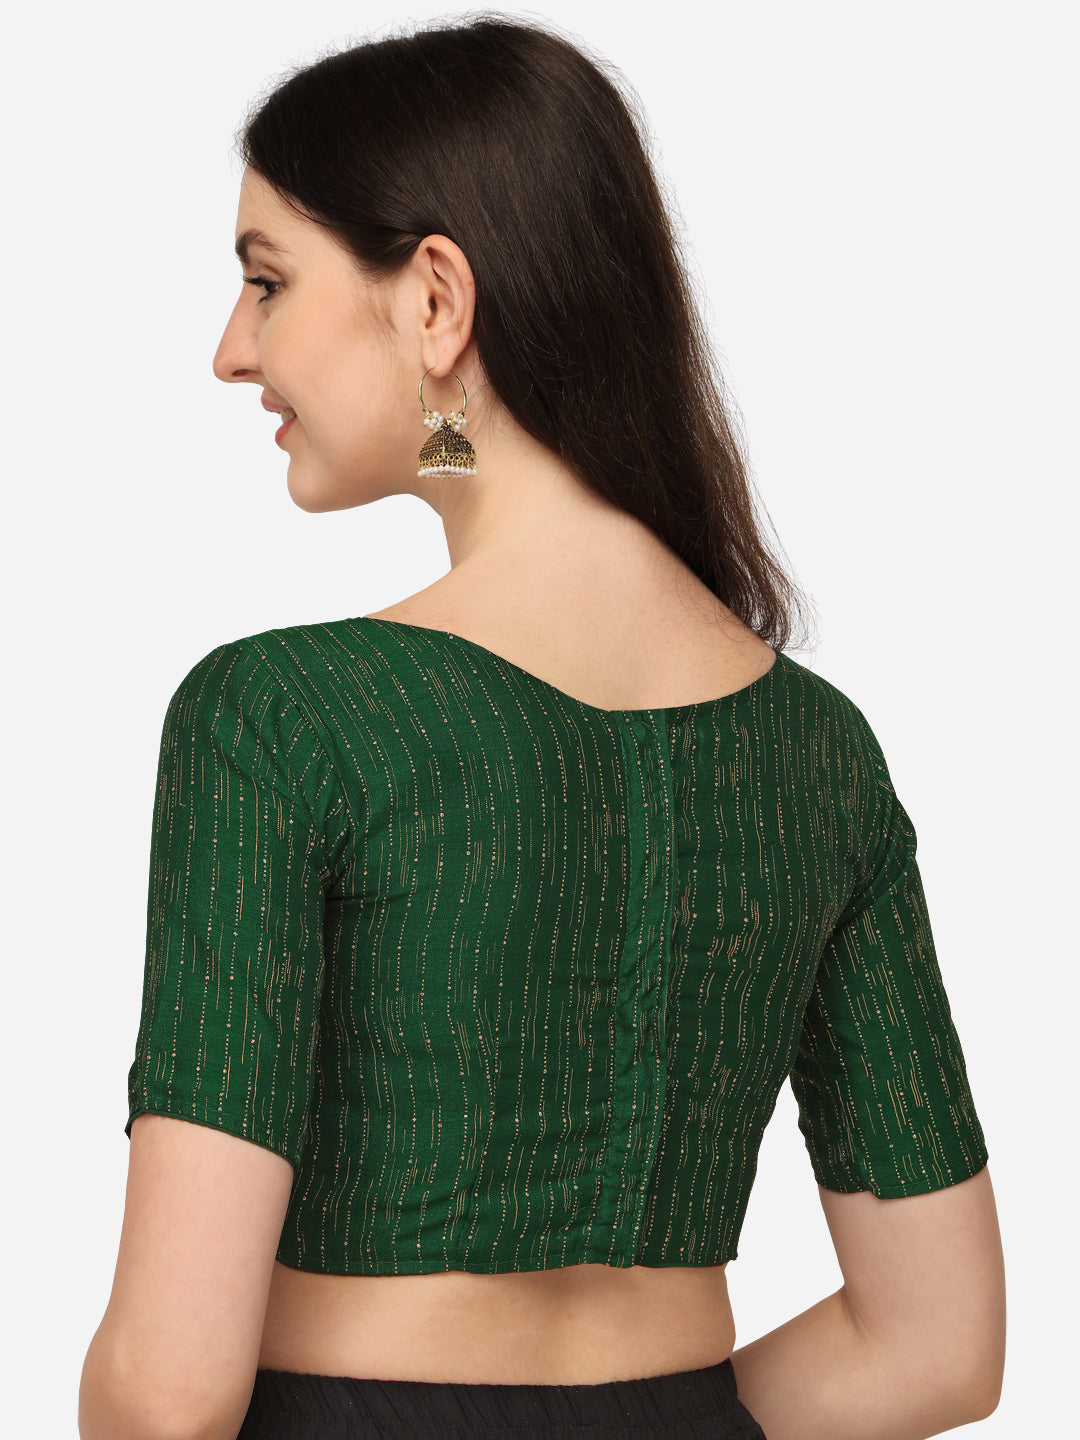 Glimmering Foil Work Green Color Beautiful Blouse